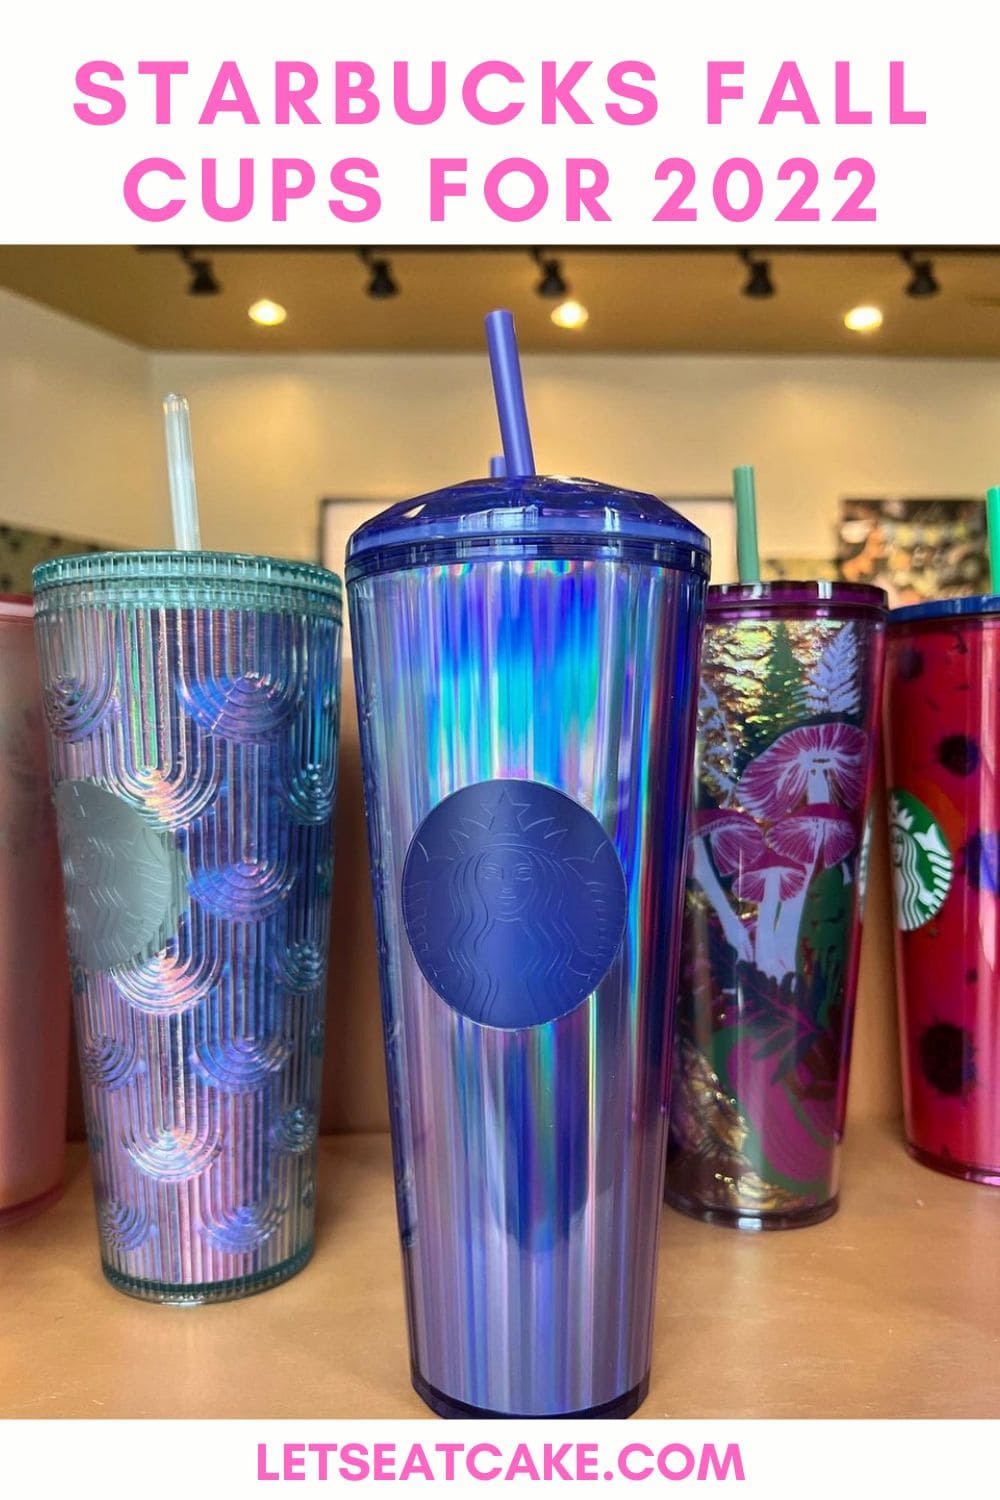 Your First Look At All the Starbucks Fall Cups and Tumblers for 2022 ...